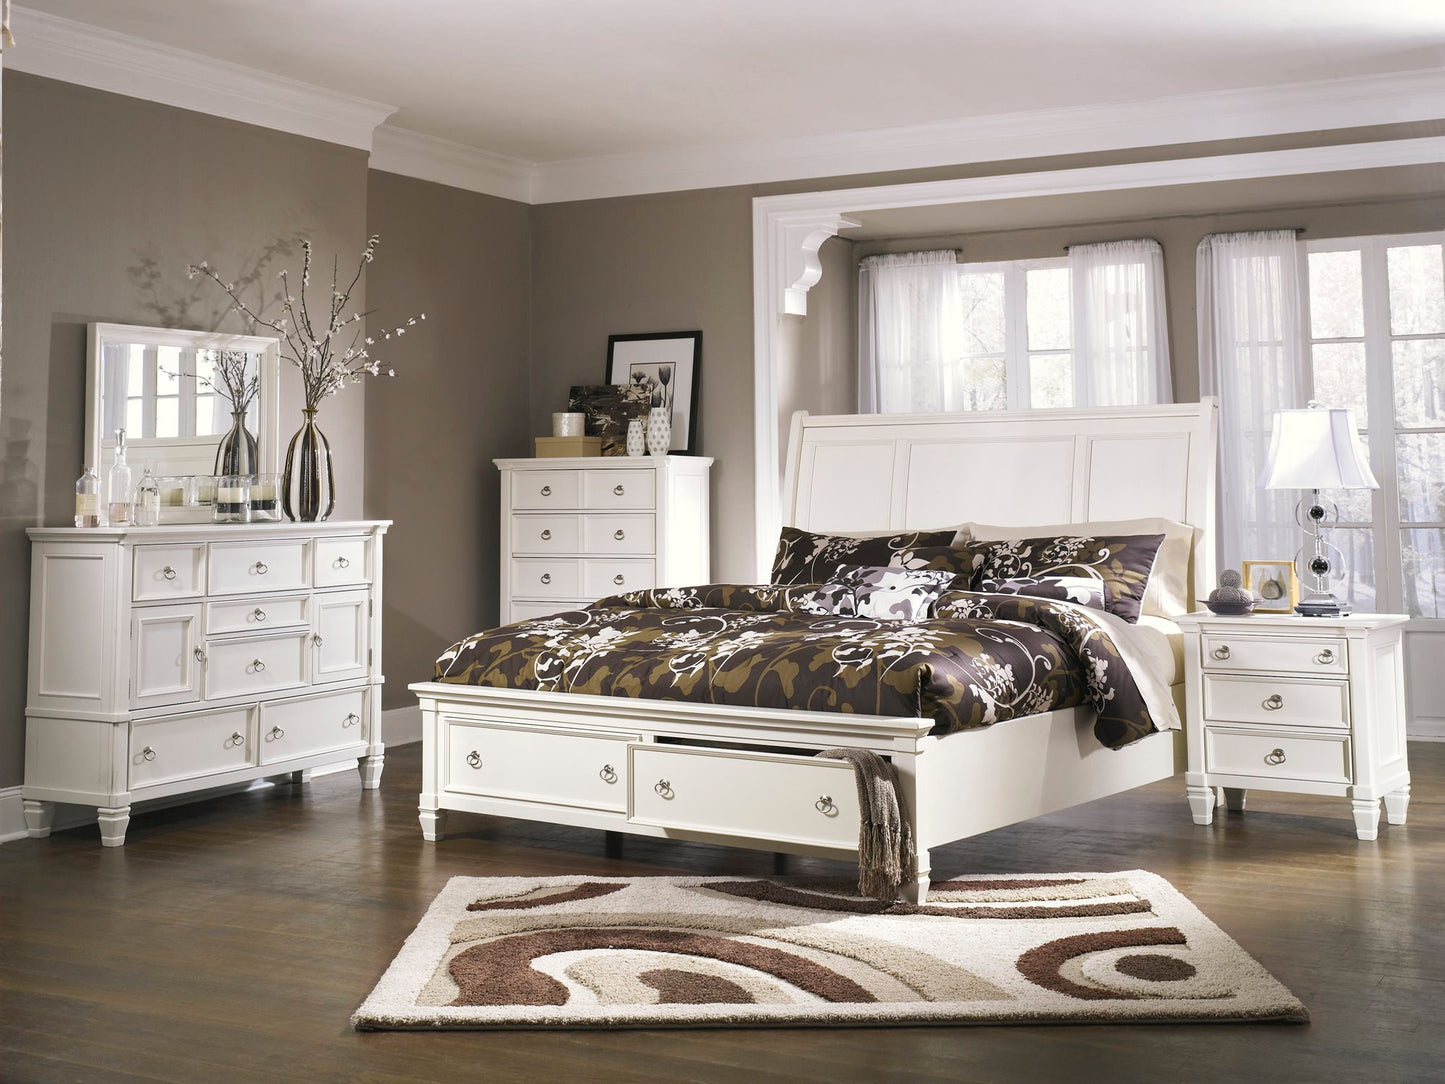 Ashley Prentice 5PC Bedroom Set Cal King Sleigh Bed Dresser Mirror Two Nightstand in White